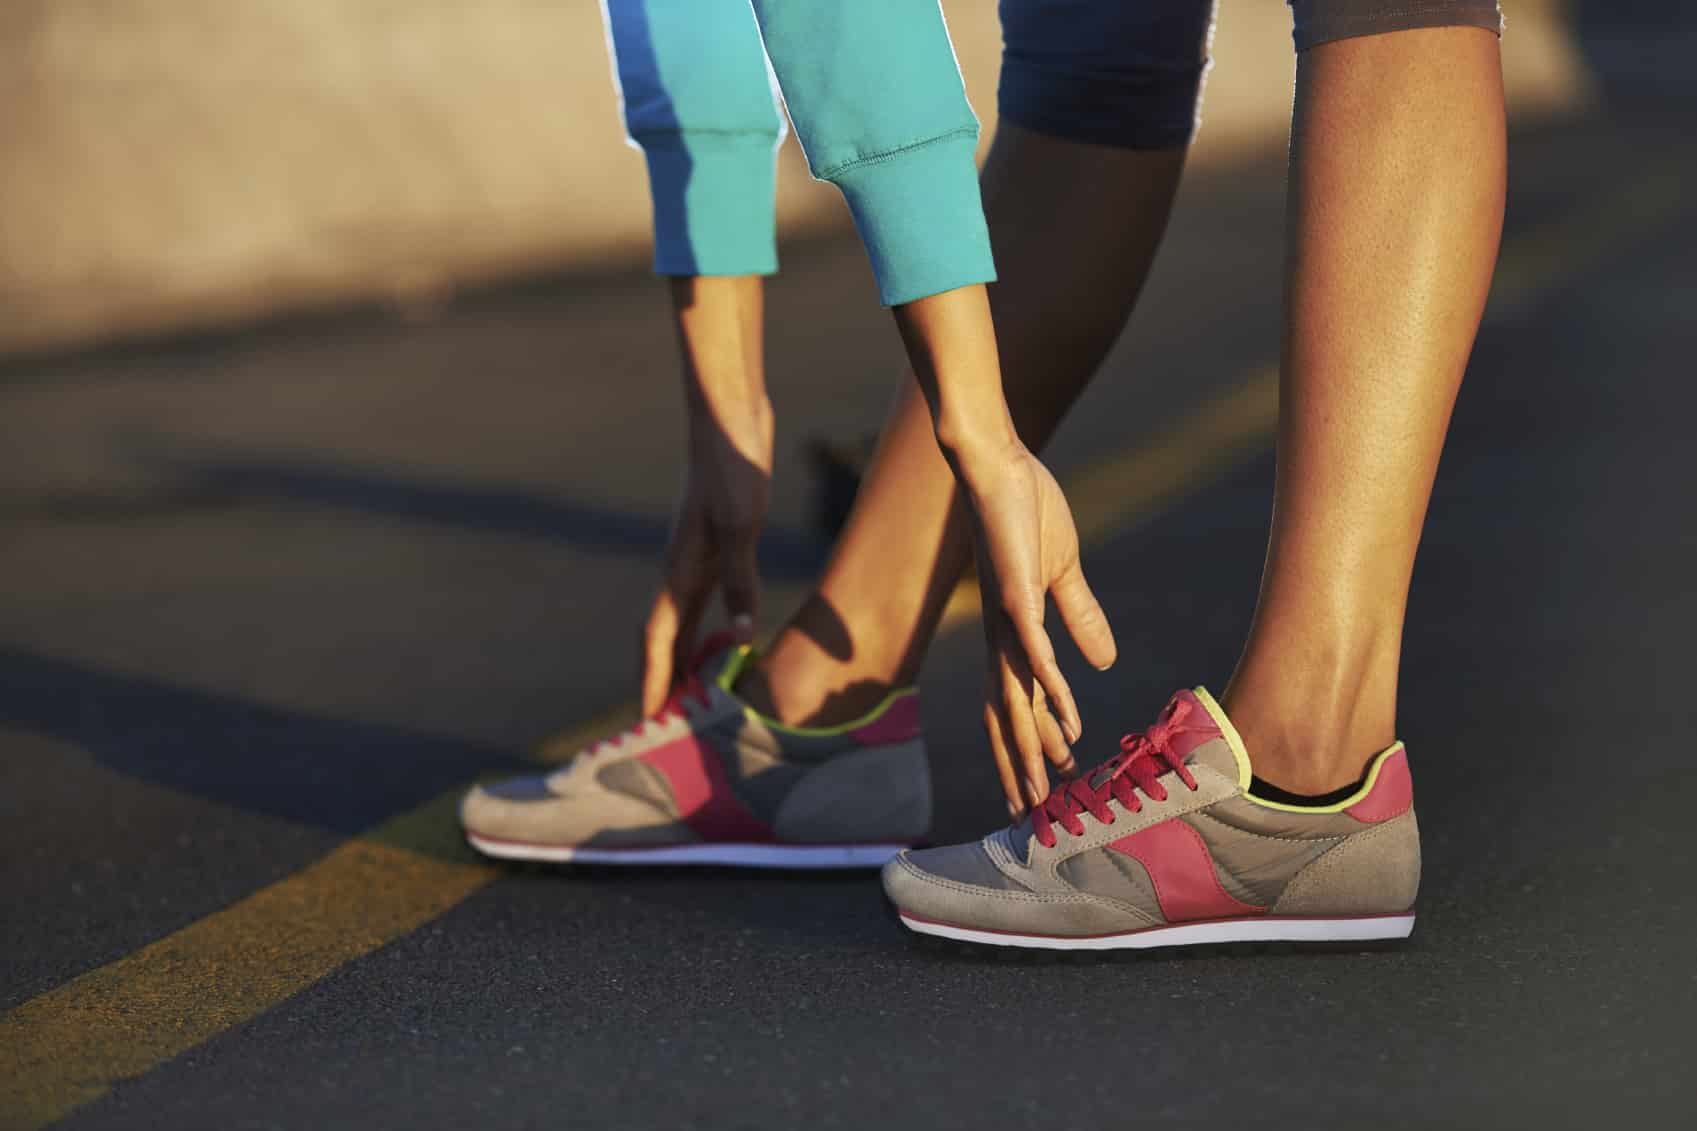 If you want to be a runner, here's a beginner's guide to get you started.